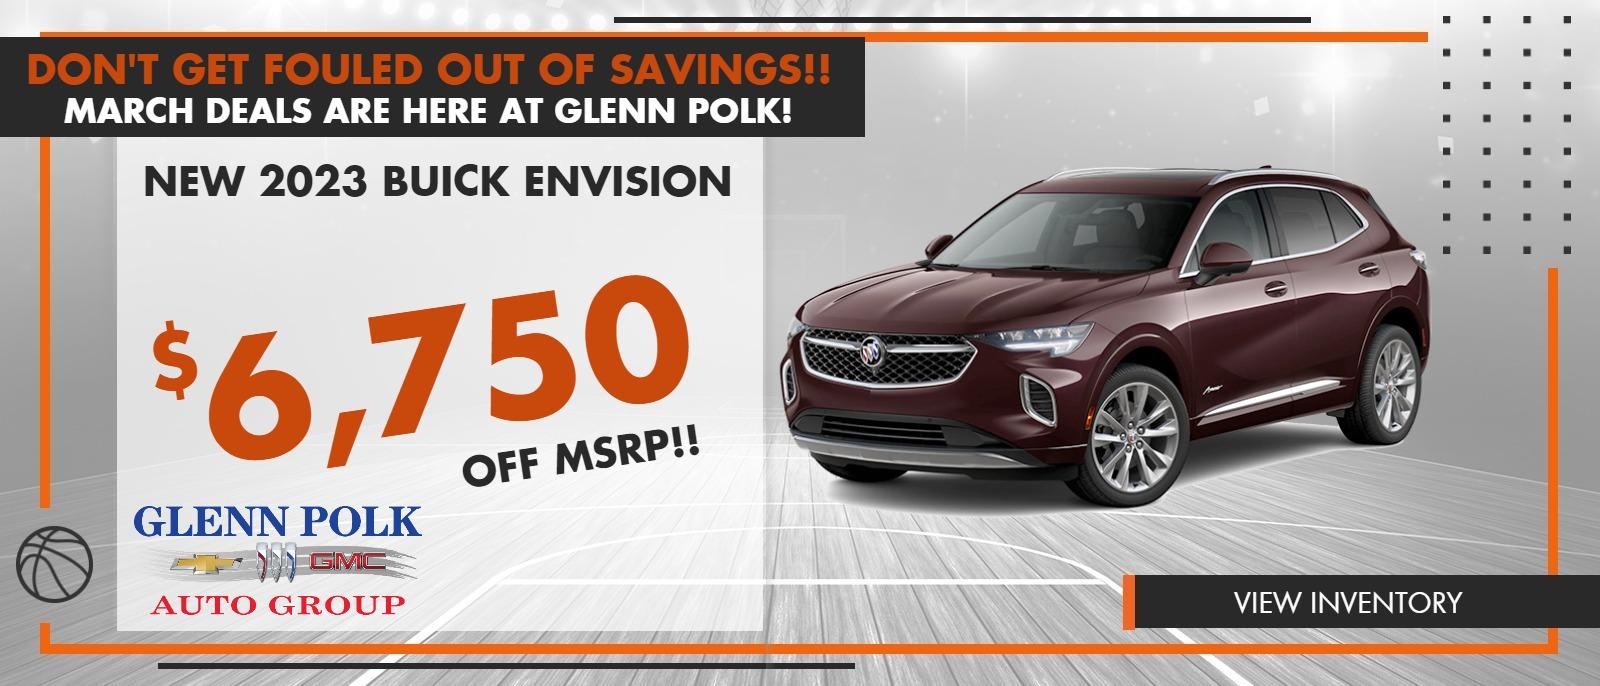 $6,750 OFF MSRP ON NEW 2023 BUICK ENVISION AT GLENN POLK AUTO GROUP IN GAINESVILLE, TX